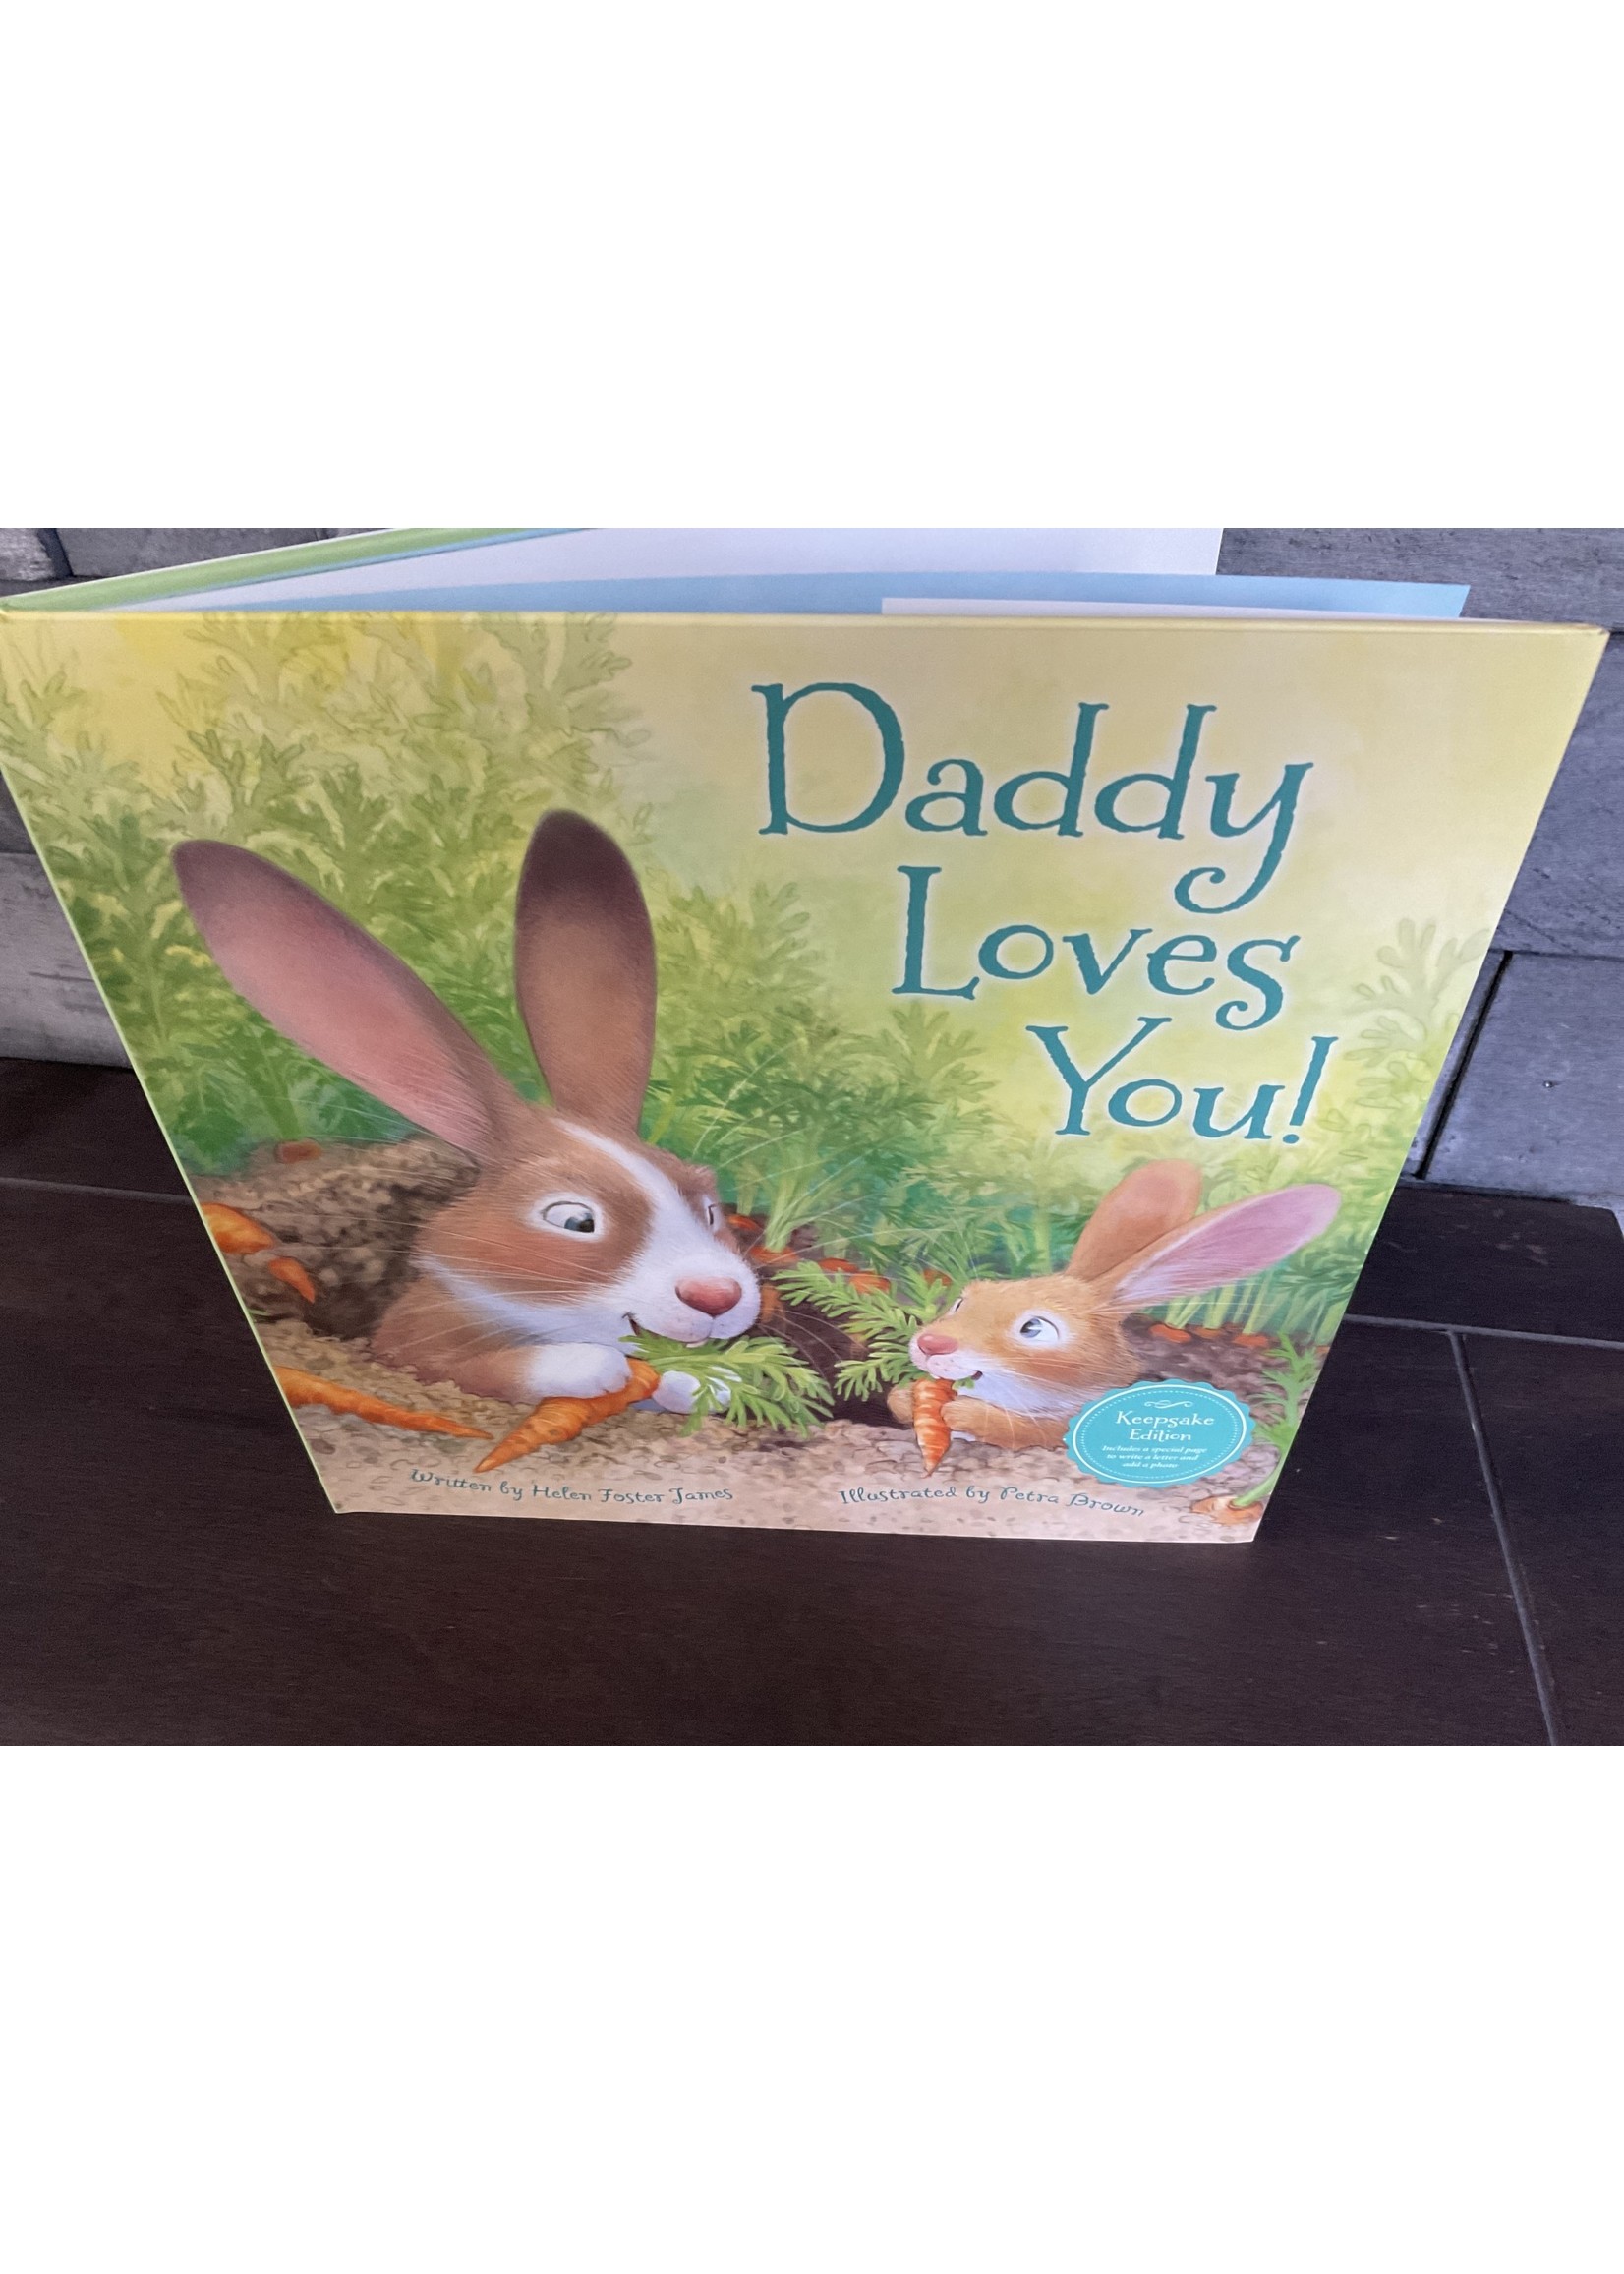 Sleeping Bear Press Daddy Loves You! Hardcover Picture Book